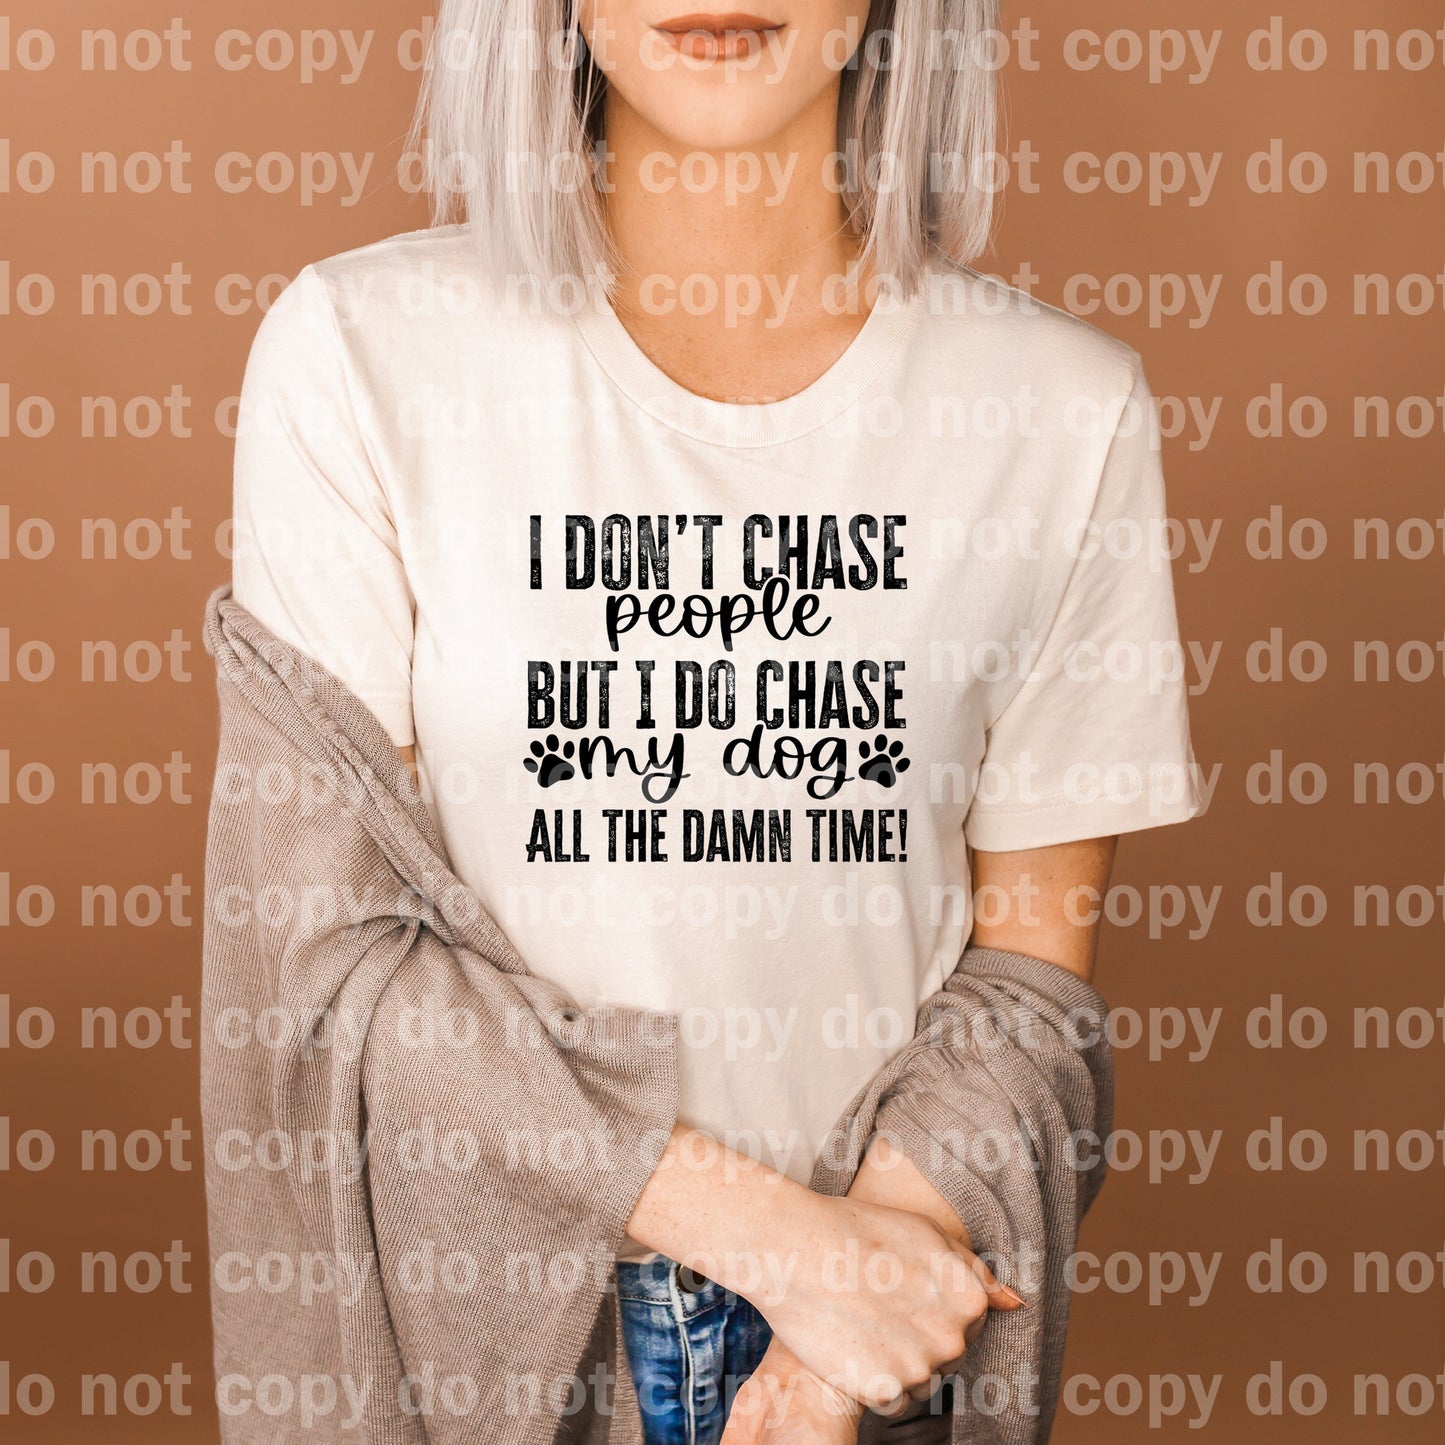 I Don't Chase People But I Do Chase My Dog All The Damn Time Black/White Dream Print or Sublimation Print